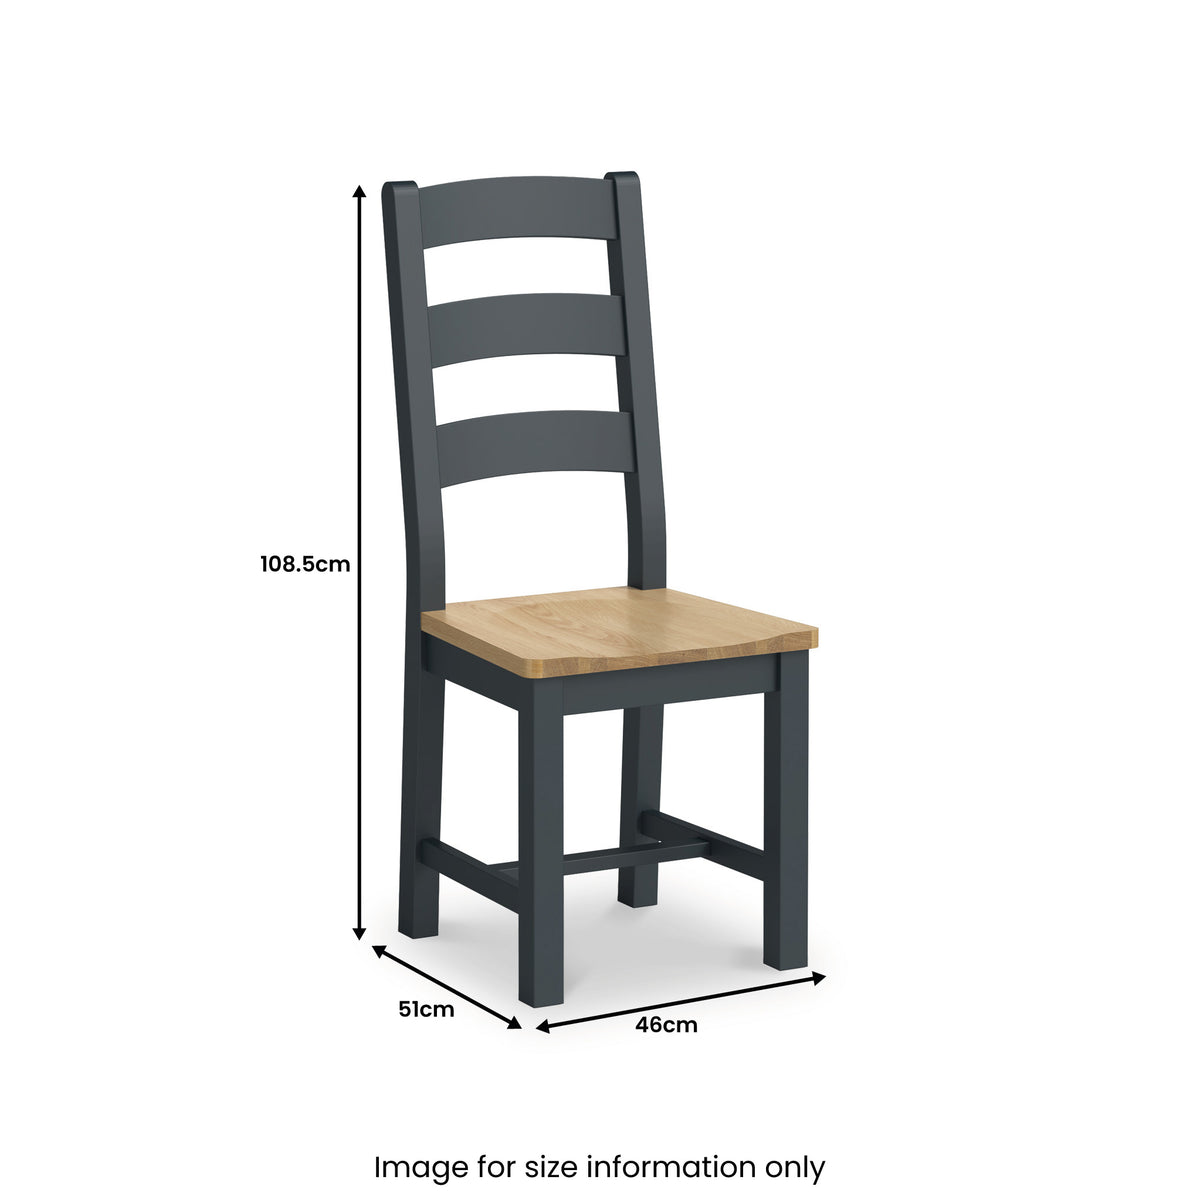 Bude Dining Chair